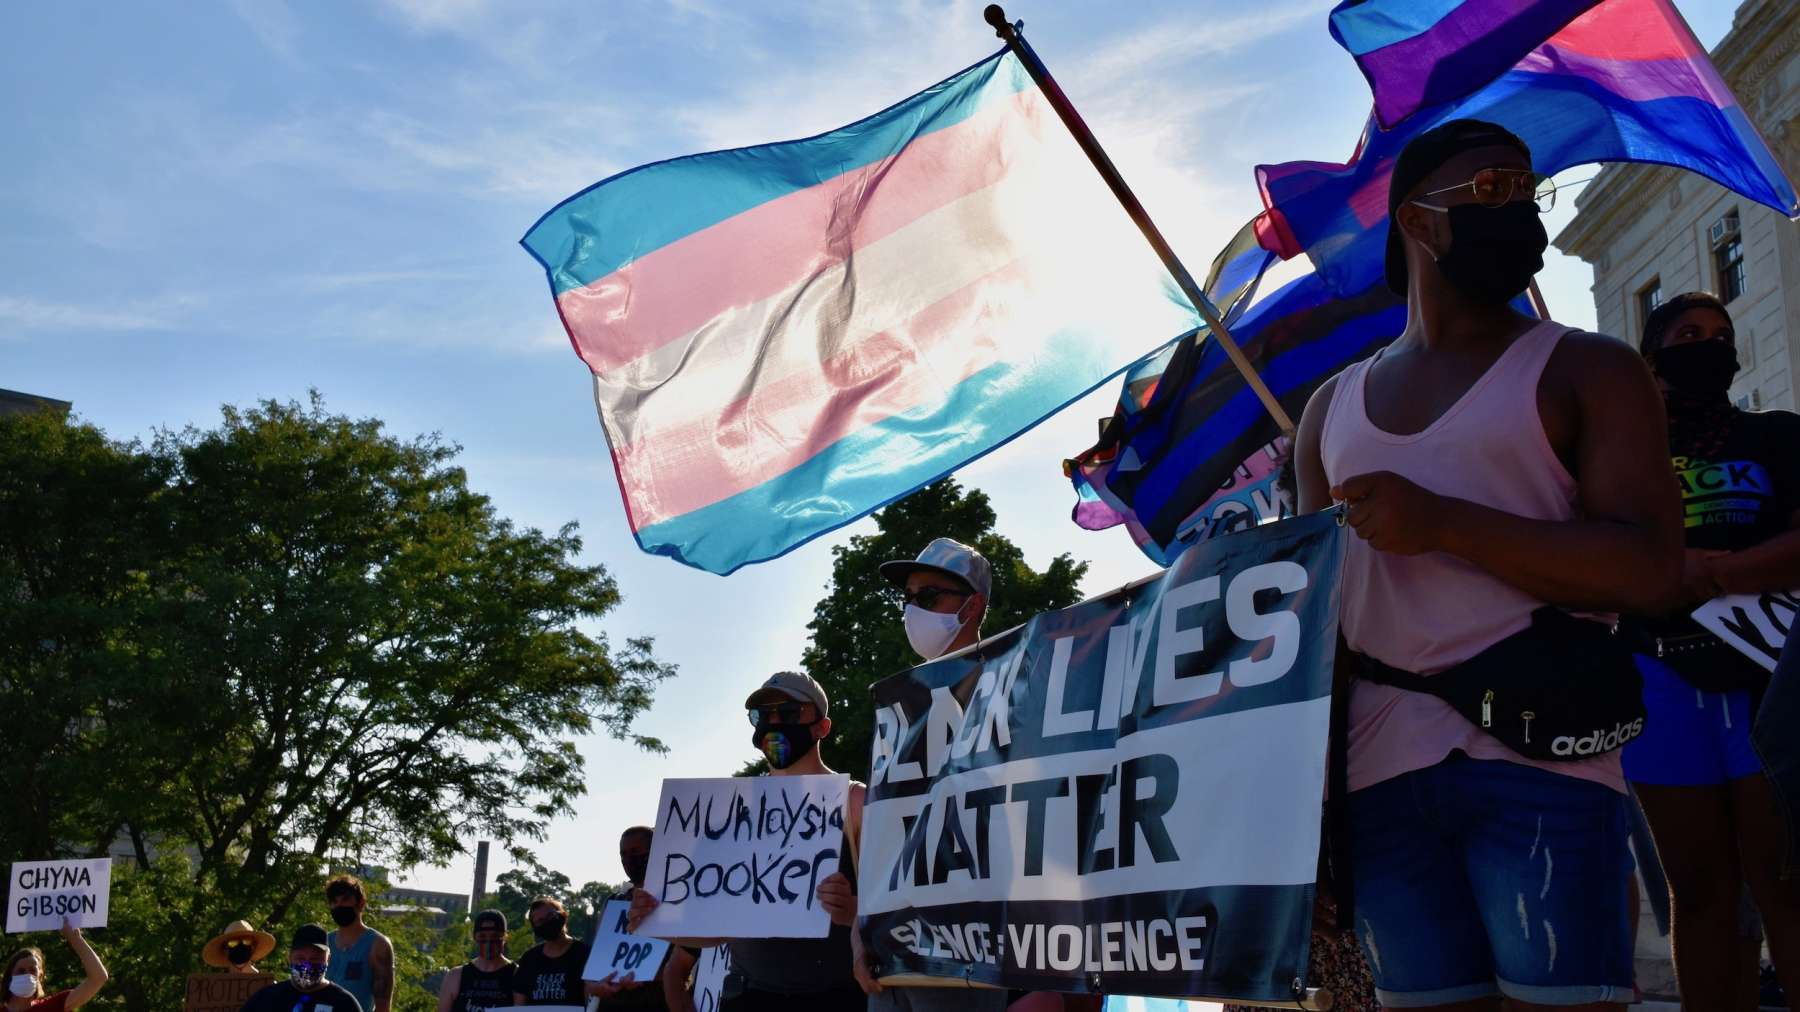 Rhode Island News: Rhode Island Pride marches for Black and Trans lives